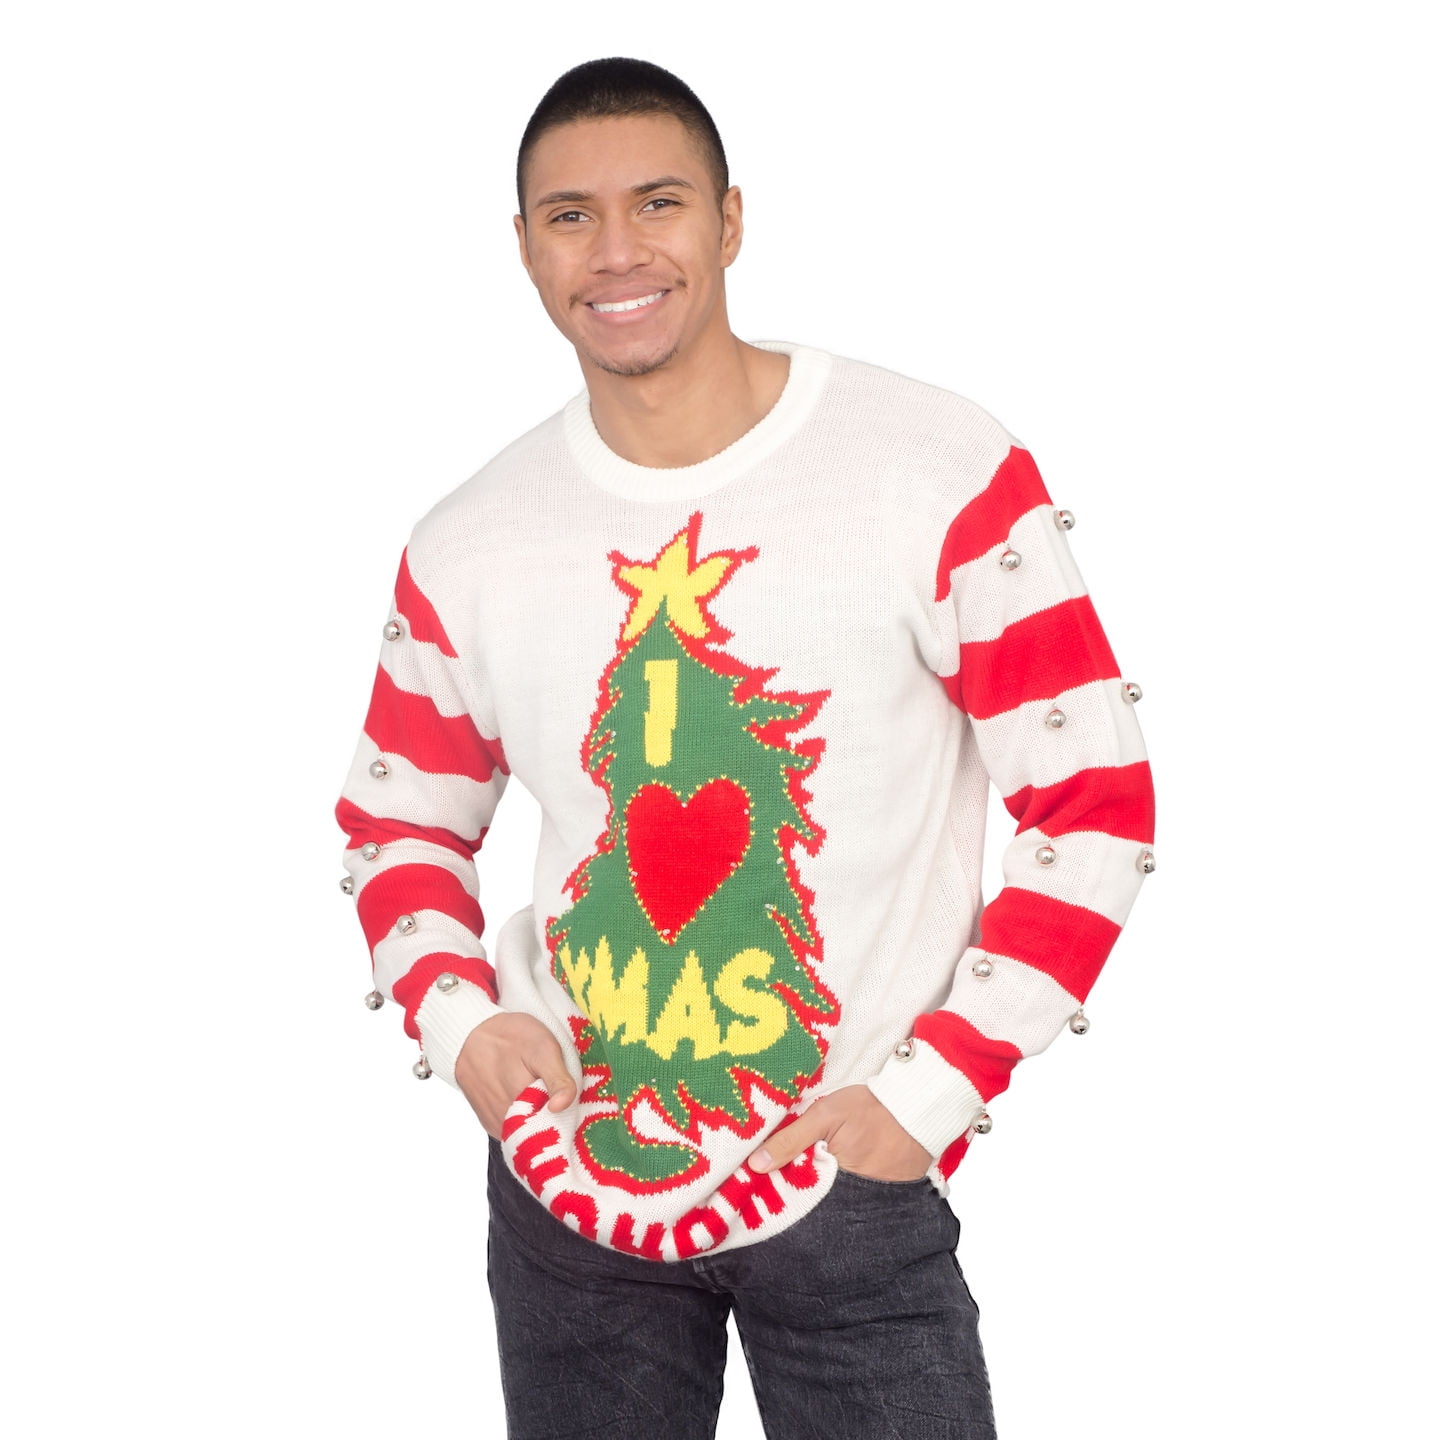 24 Ugly Christmas Sweaters That Are Actually Cute